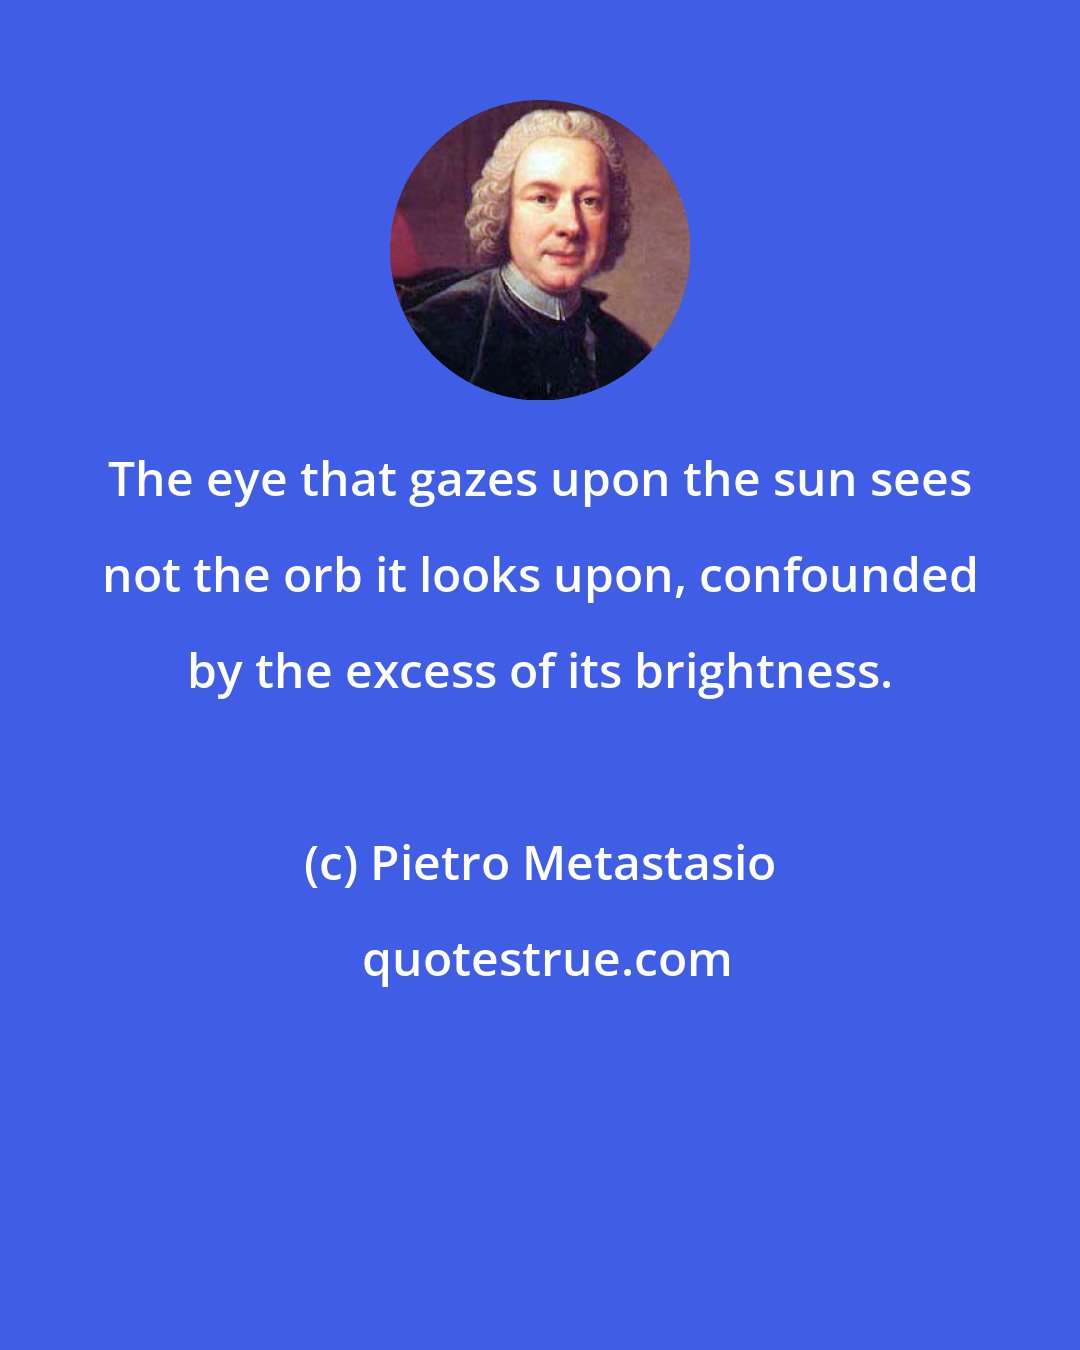 Pietro Metastasio: The eye that gazes upon the sun sees not the orb it looks upon, confounded by the excess of its brightness.